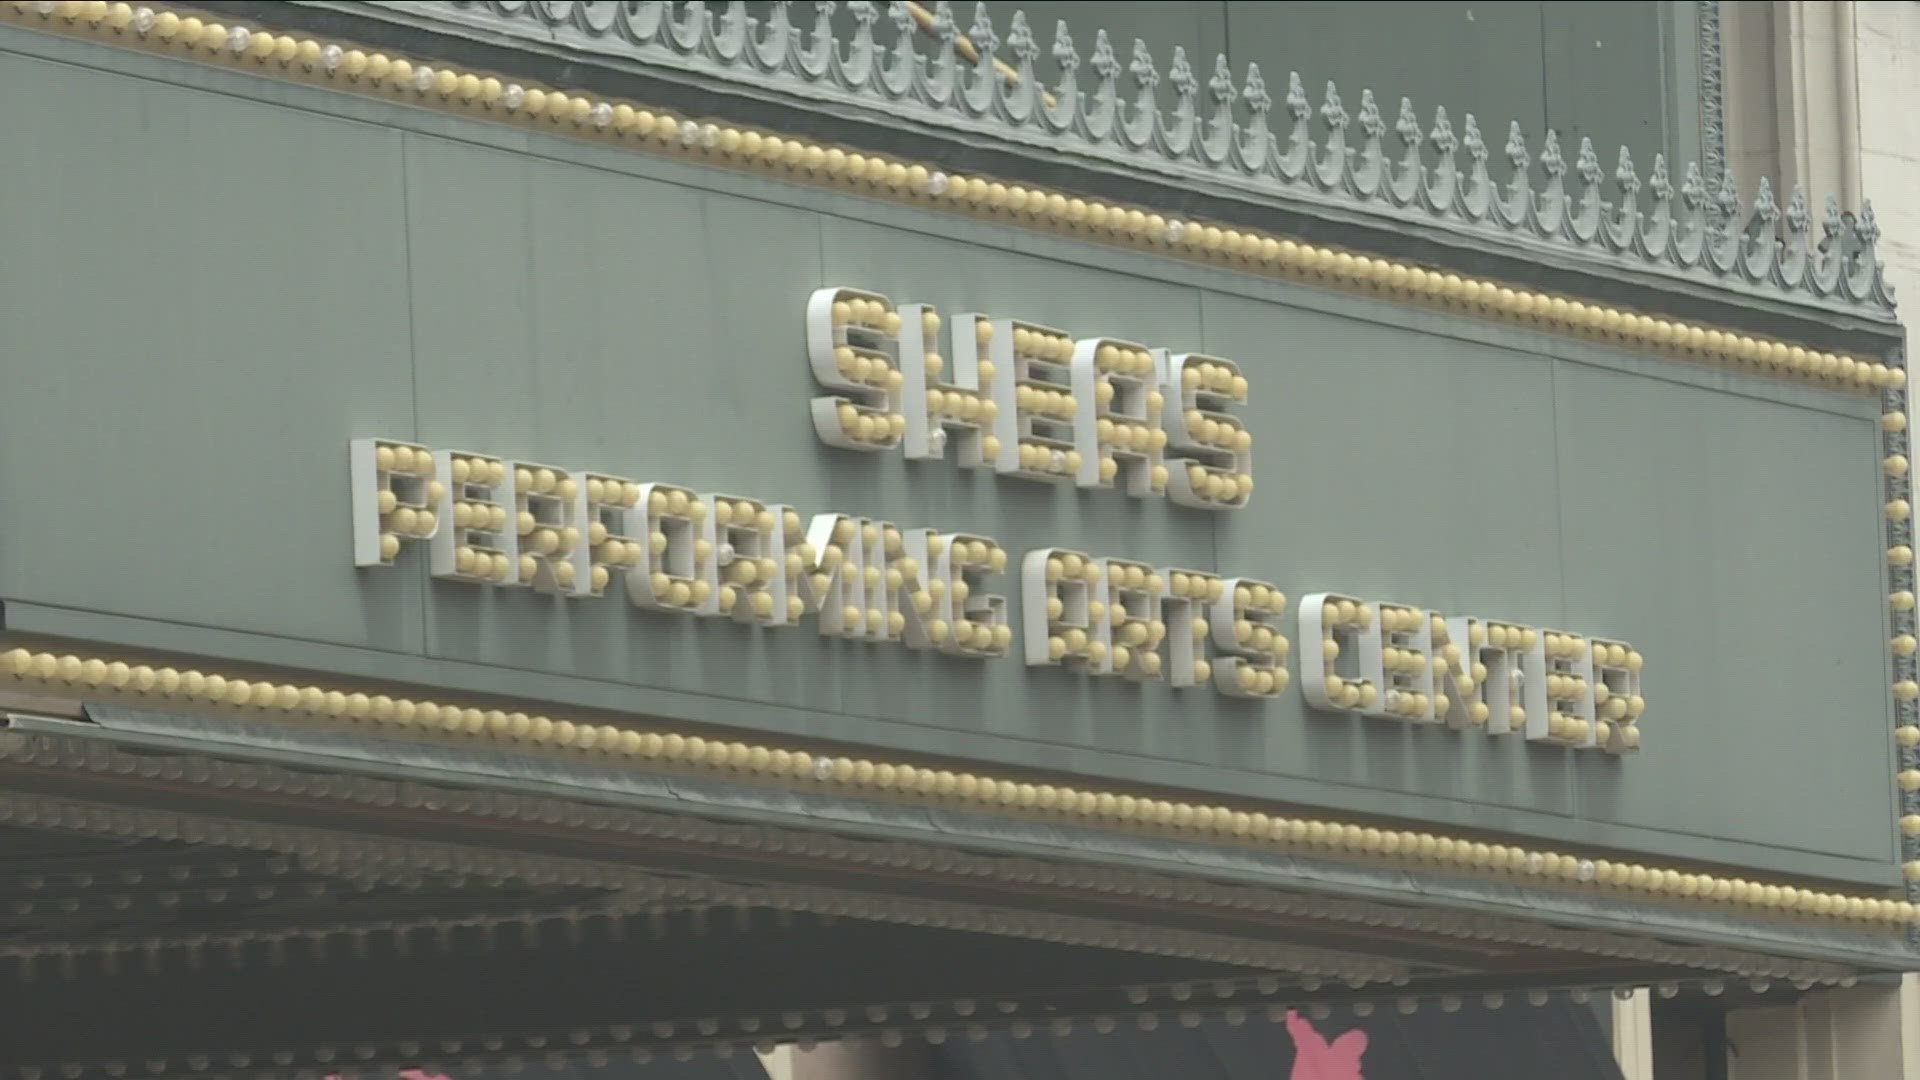 It's part of $5 million dollars being allocated for historic theaters in this year's state budget.